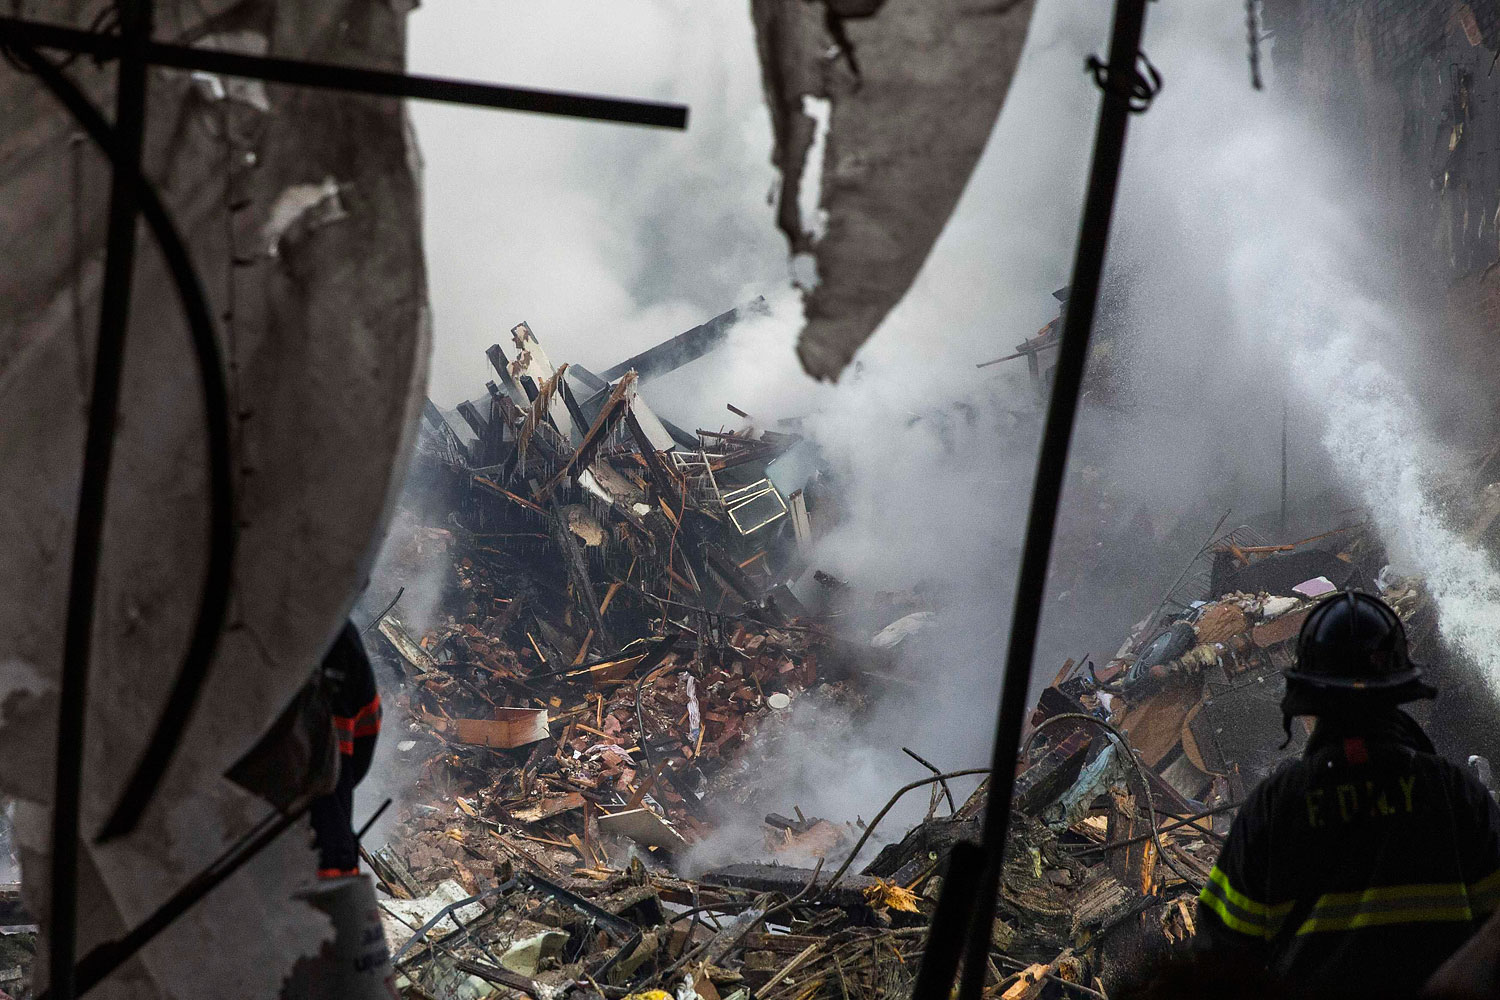 New York City emergency responders search through the rubble at the site of a building explosion in the Harlem section of New York, March 13, 2014. (Brendan McDermid—Reuters)